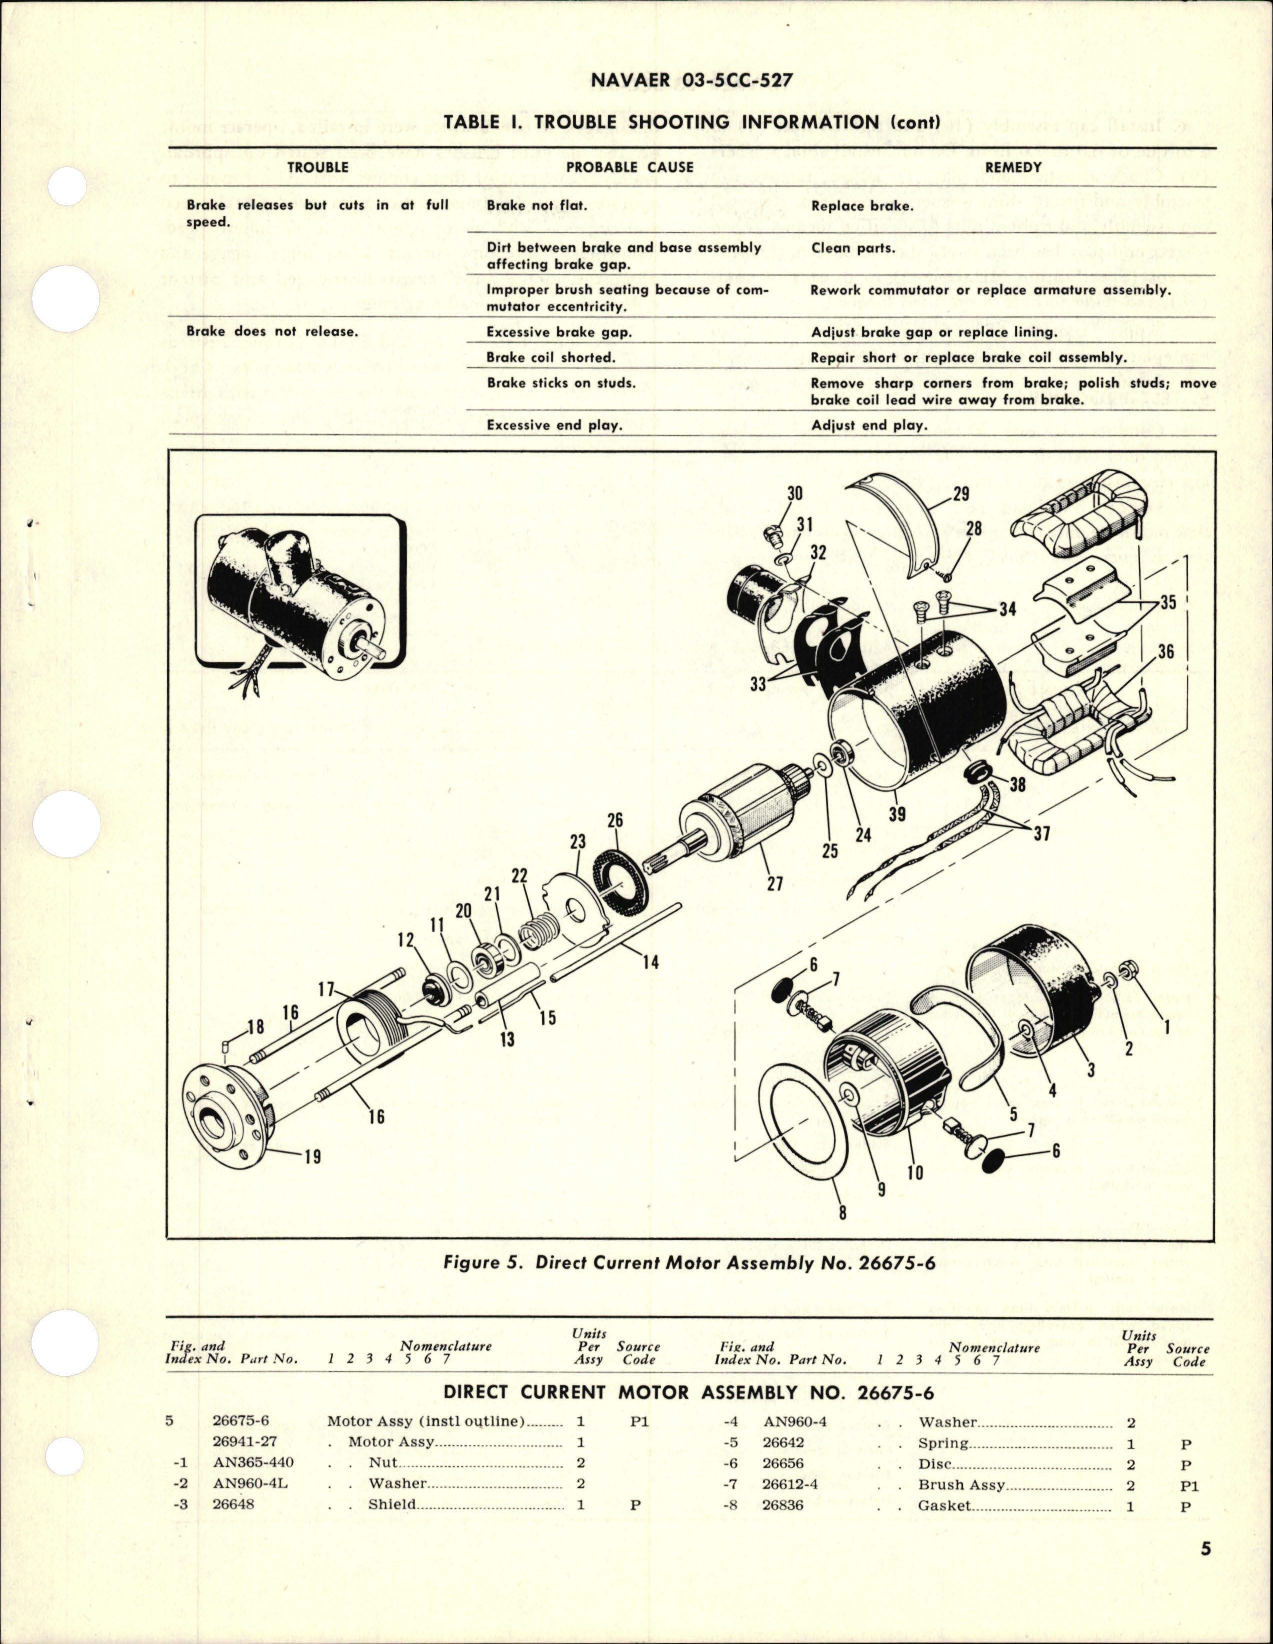 Sample page 5 from AirCorps Library document: Overhaul Instructions with Parts Breakdown for Direct Current Motor Assembly - 26675-6